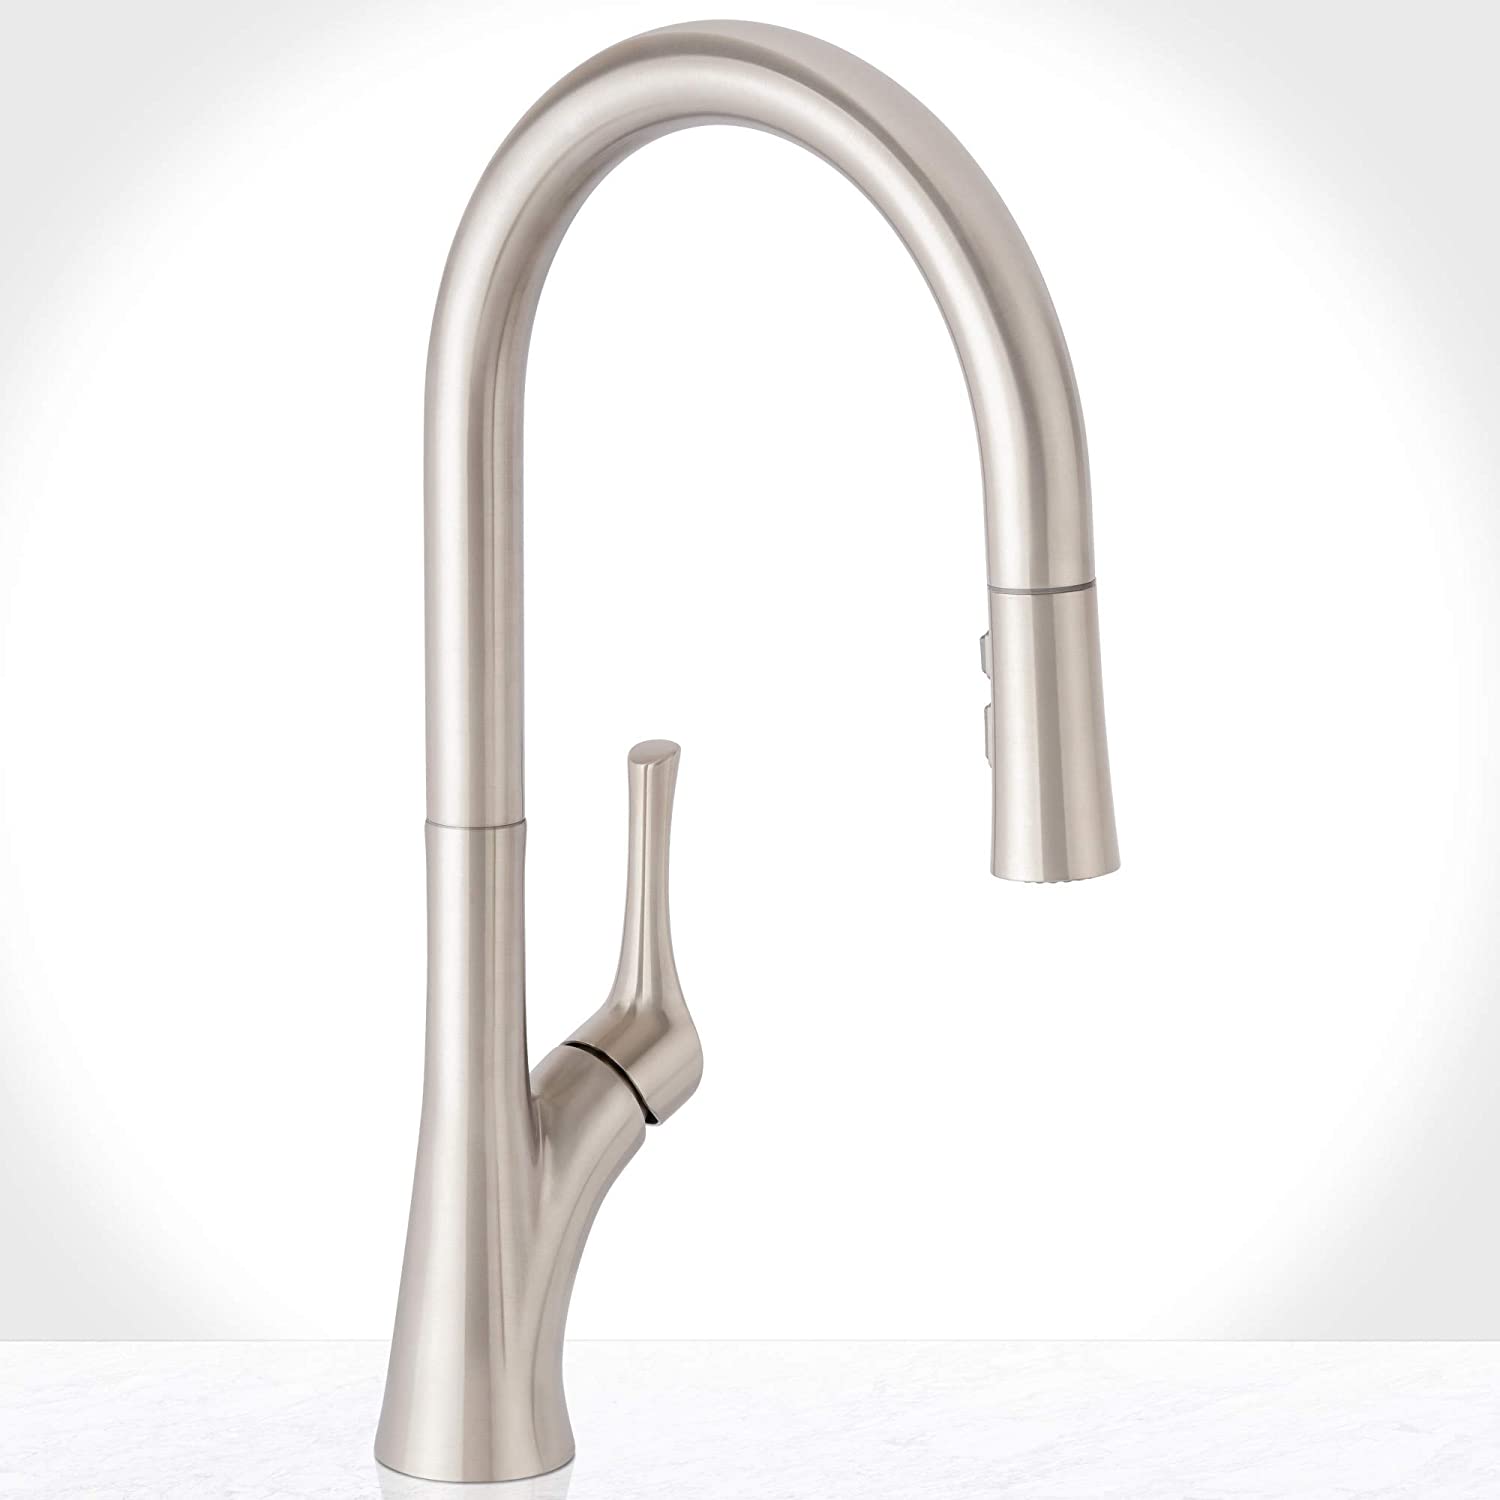 Miseno - MNO171DZSS Miseno MK171 Bella Pull-Down Kitchen Faucet with EasySeat Multi-Flow Spray Head - Includes Optional Deck Plate - Stainless Steel